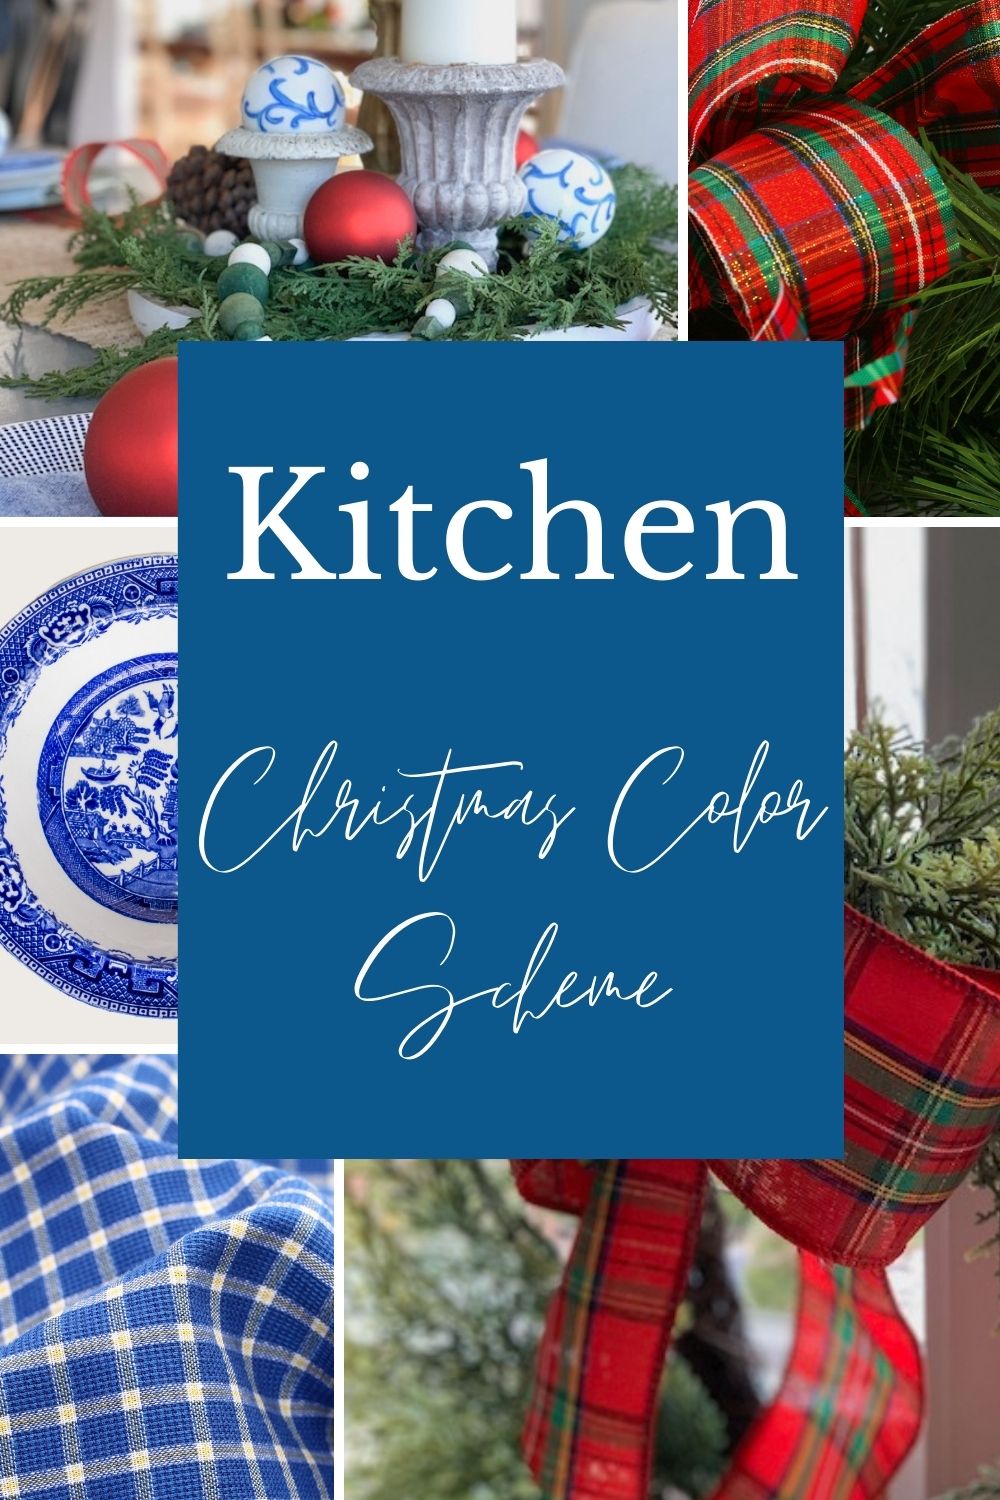 Red Tartan Plaid and Blue Christmas Theme in the Kitchen 